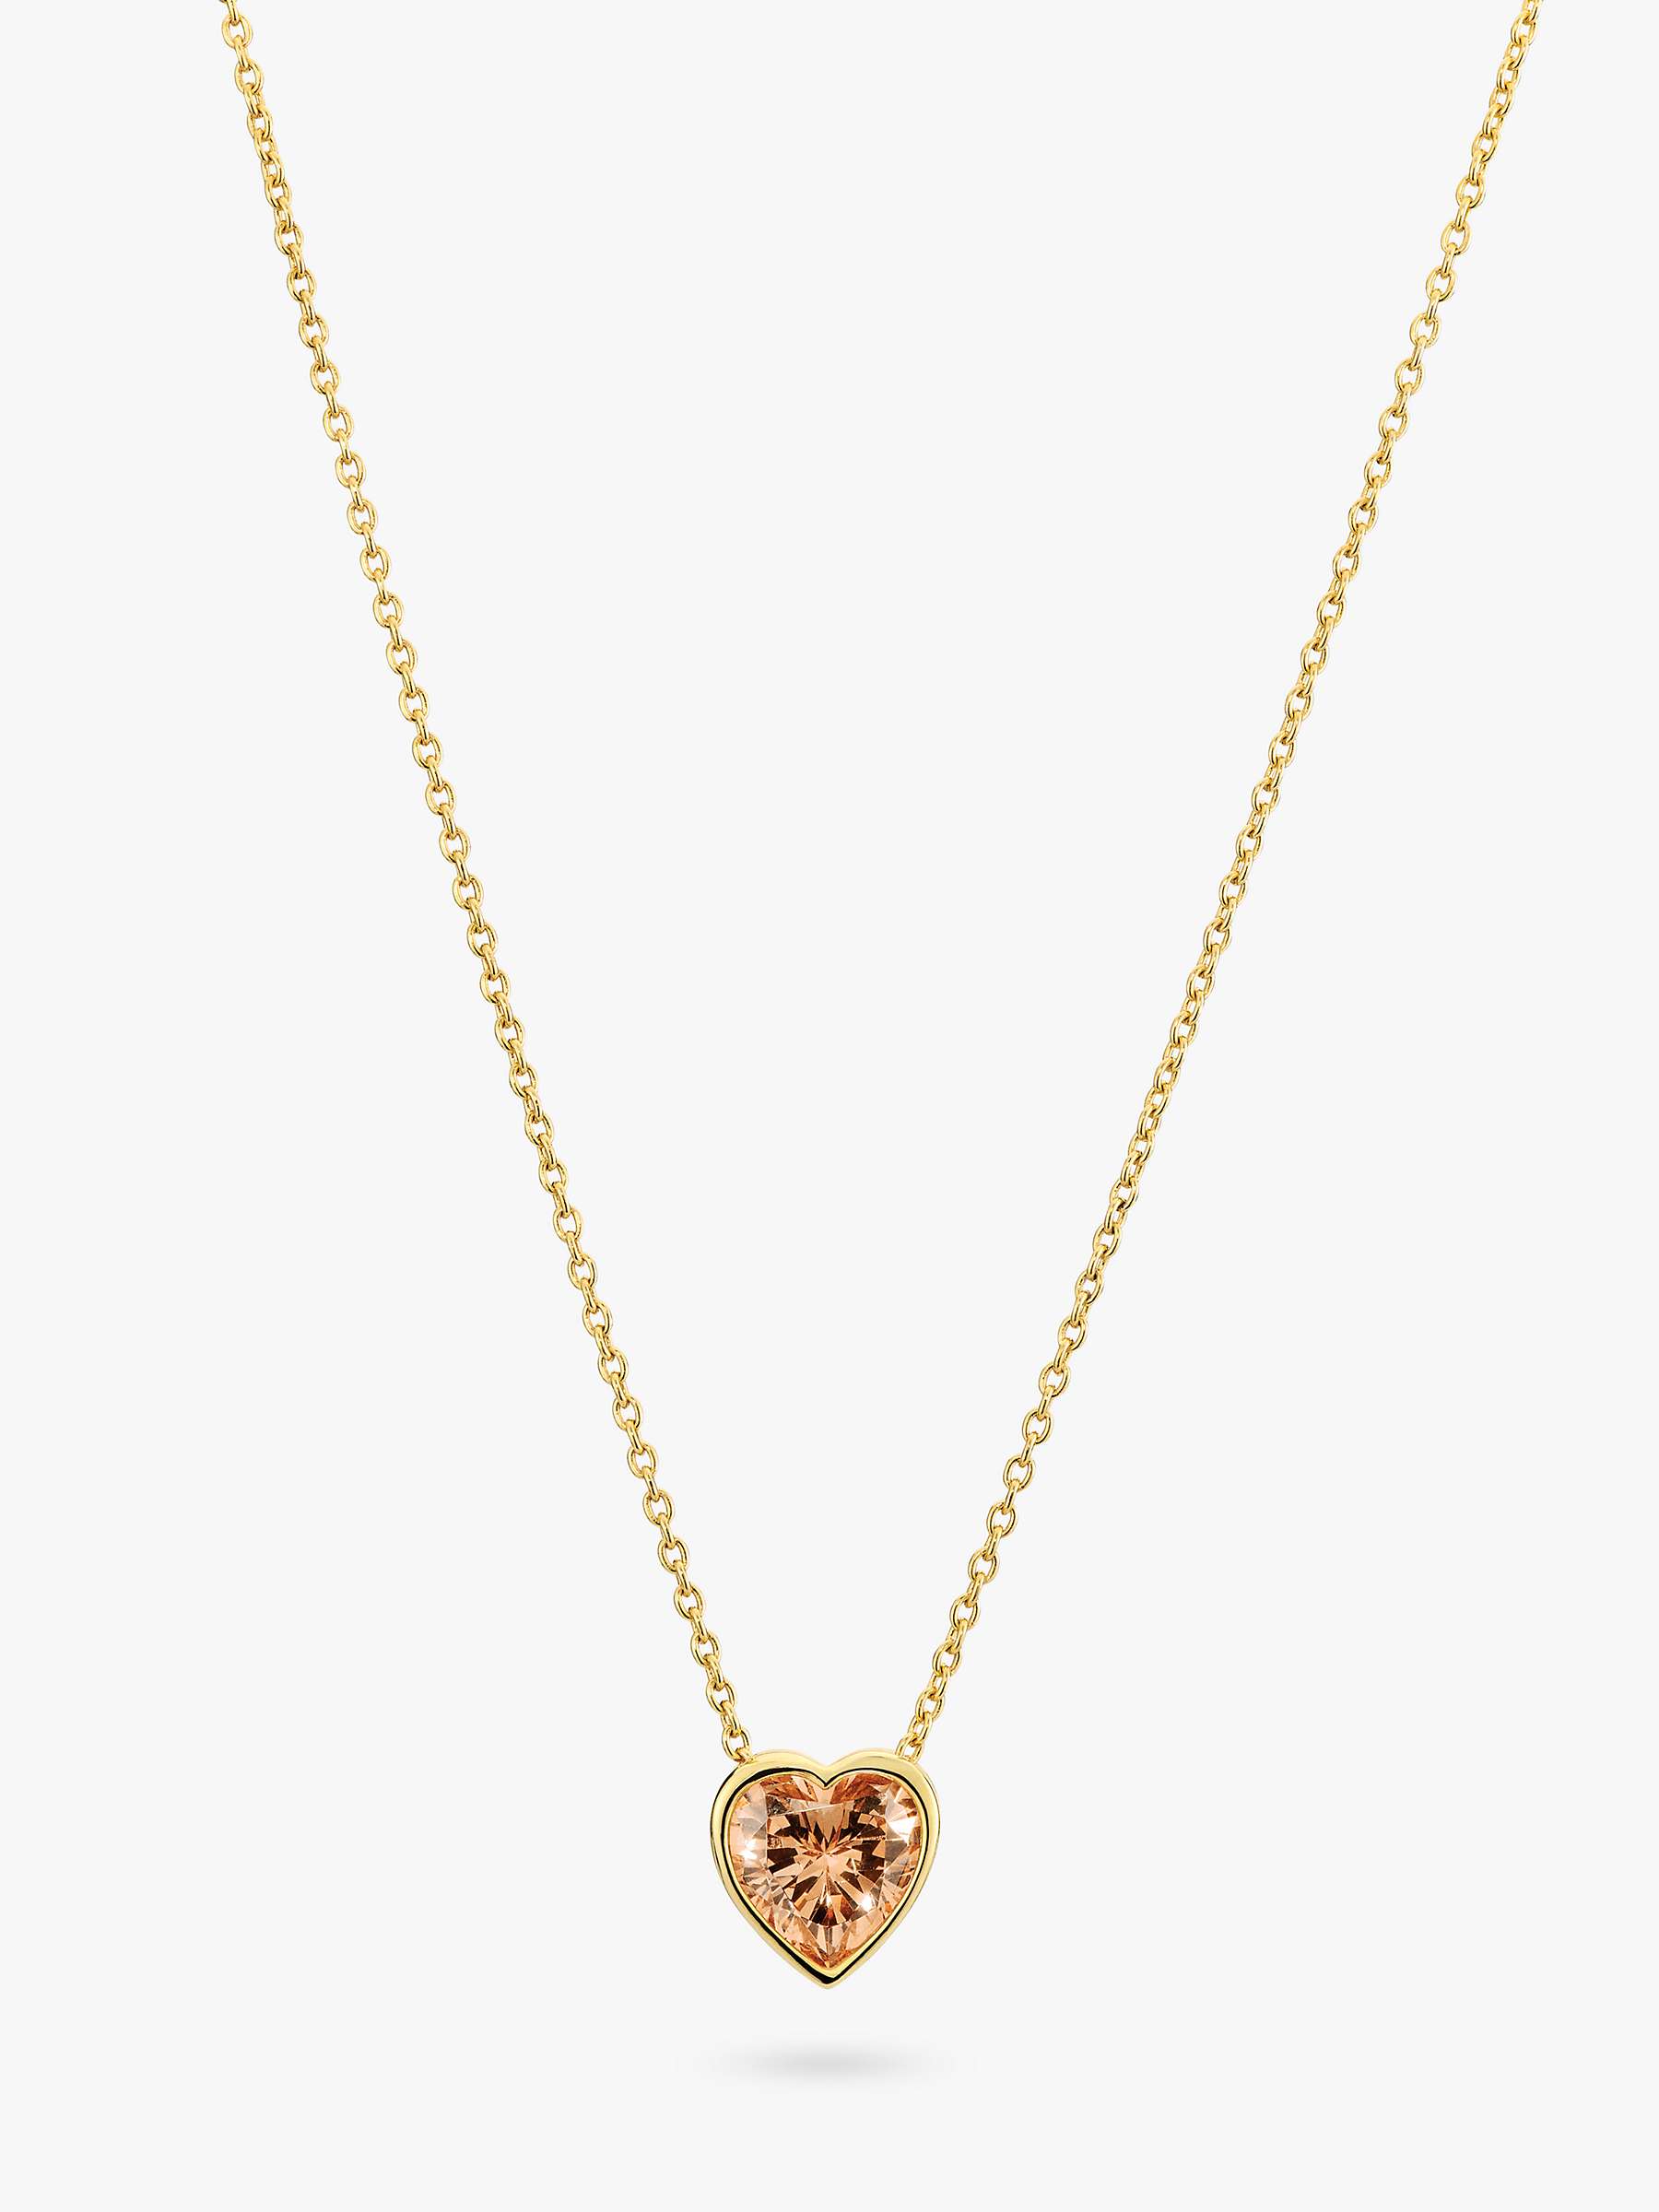 Buy Sif Jakobs Jewellery Amorino Cubic Zirconia Heart Pendant Necklace, Gold Online at johnlewis.com